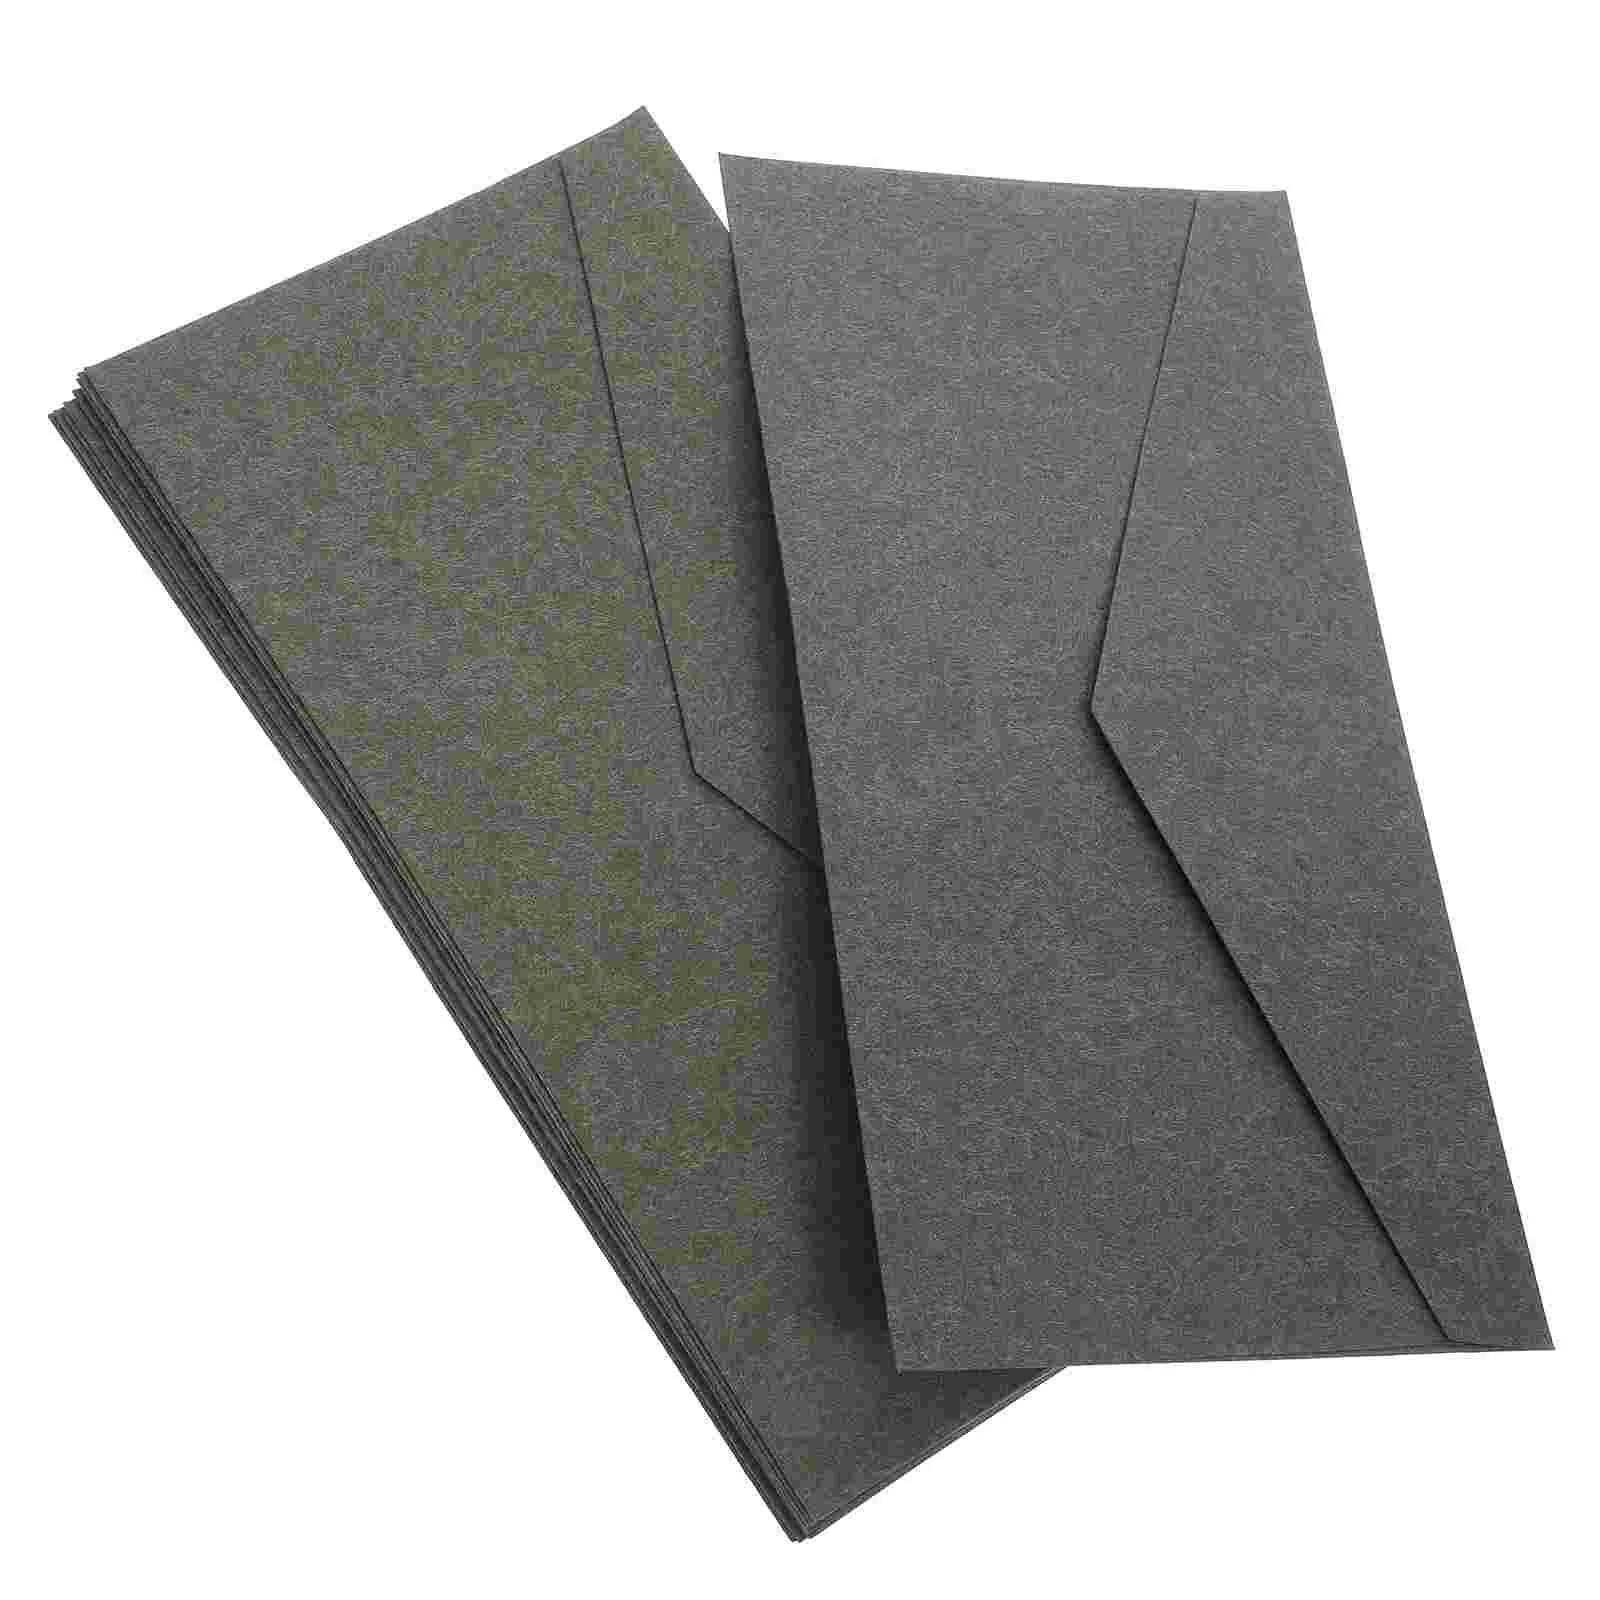 10 Pcs Envelope Small Envelopes Accessories for Card Wedding Invitation Cards Paper Compact 50 pcs greeting cards kraft envelope document folder blank envelopes thicken paper files photo bag